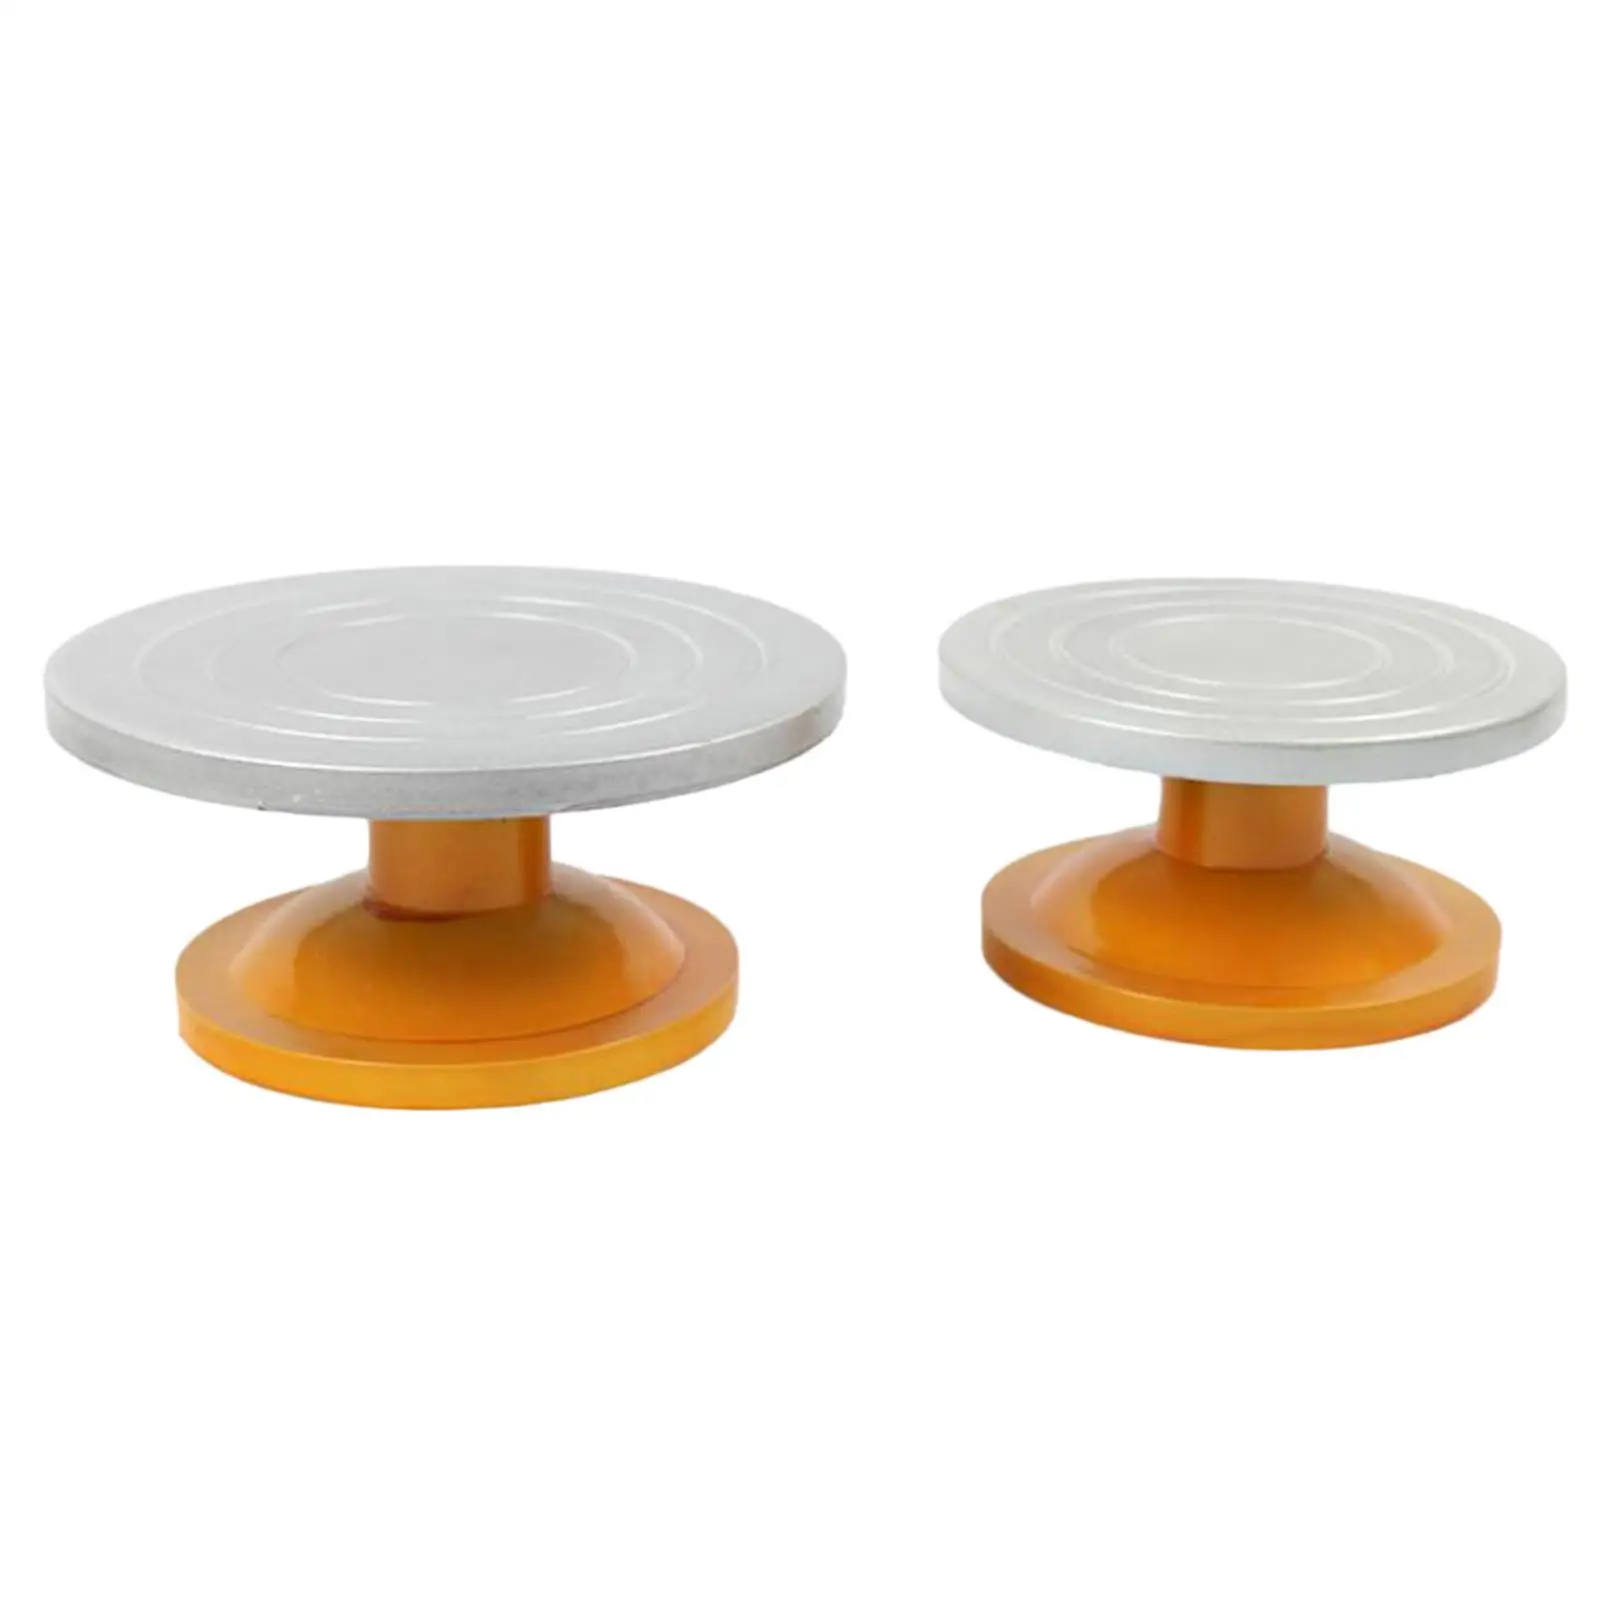 Double-Sided Sculpting Wheel Turntable Cake Decorating Art Crafts